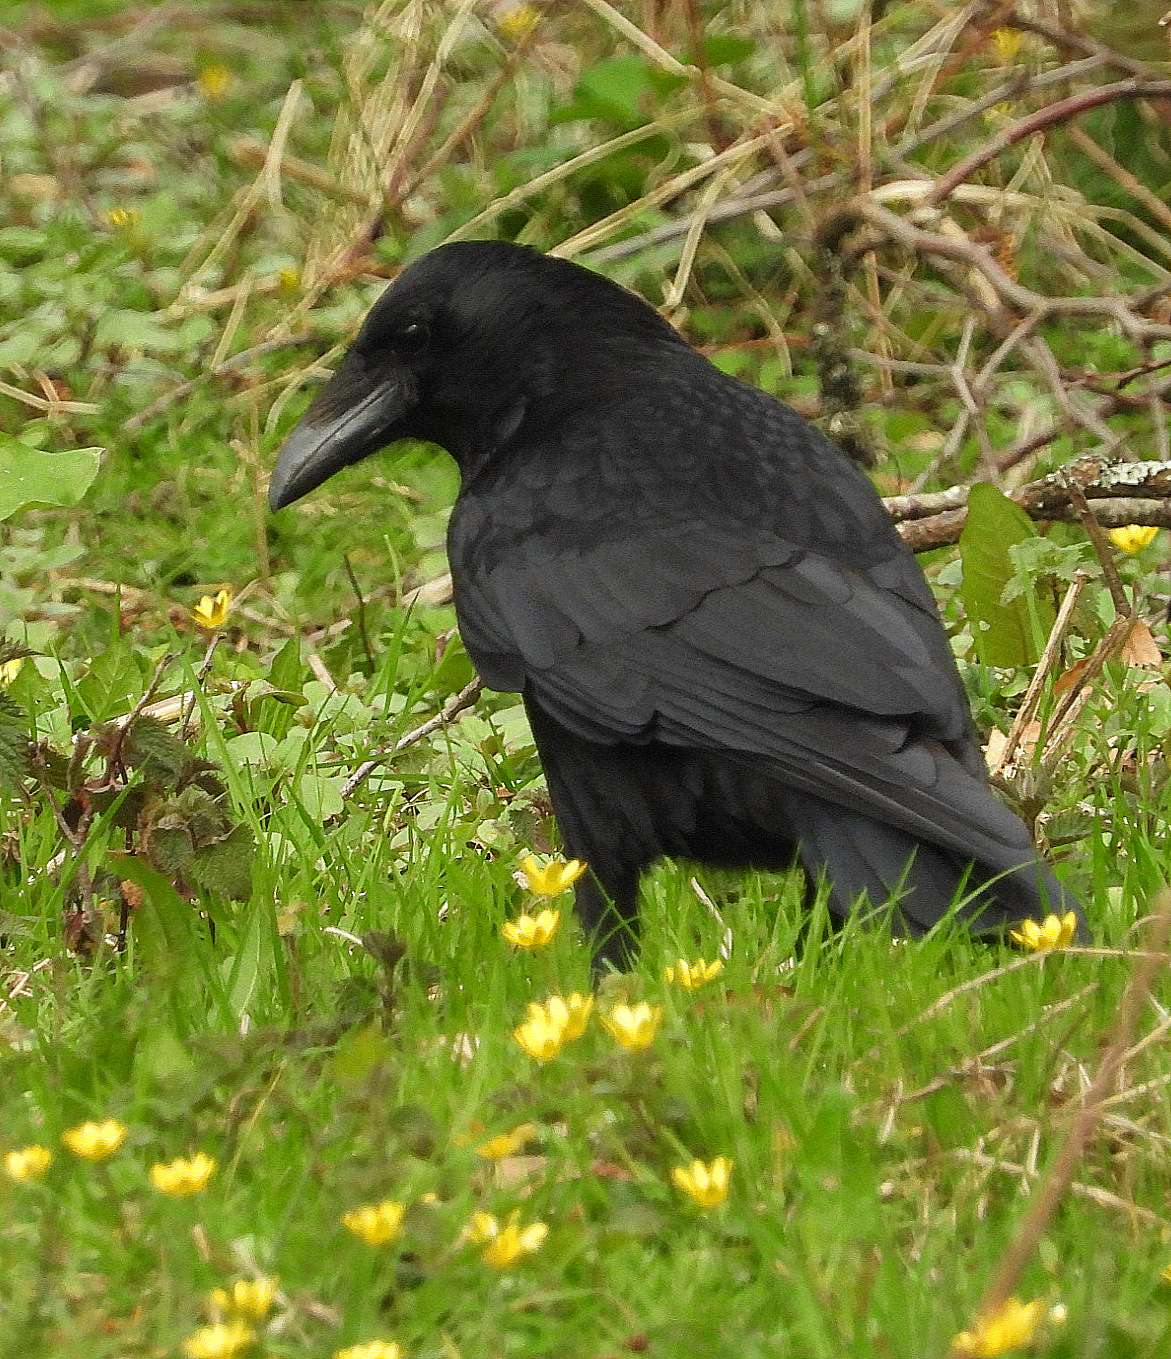 Carrion Crow by Kenneth Bradley at Parke NT